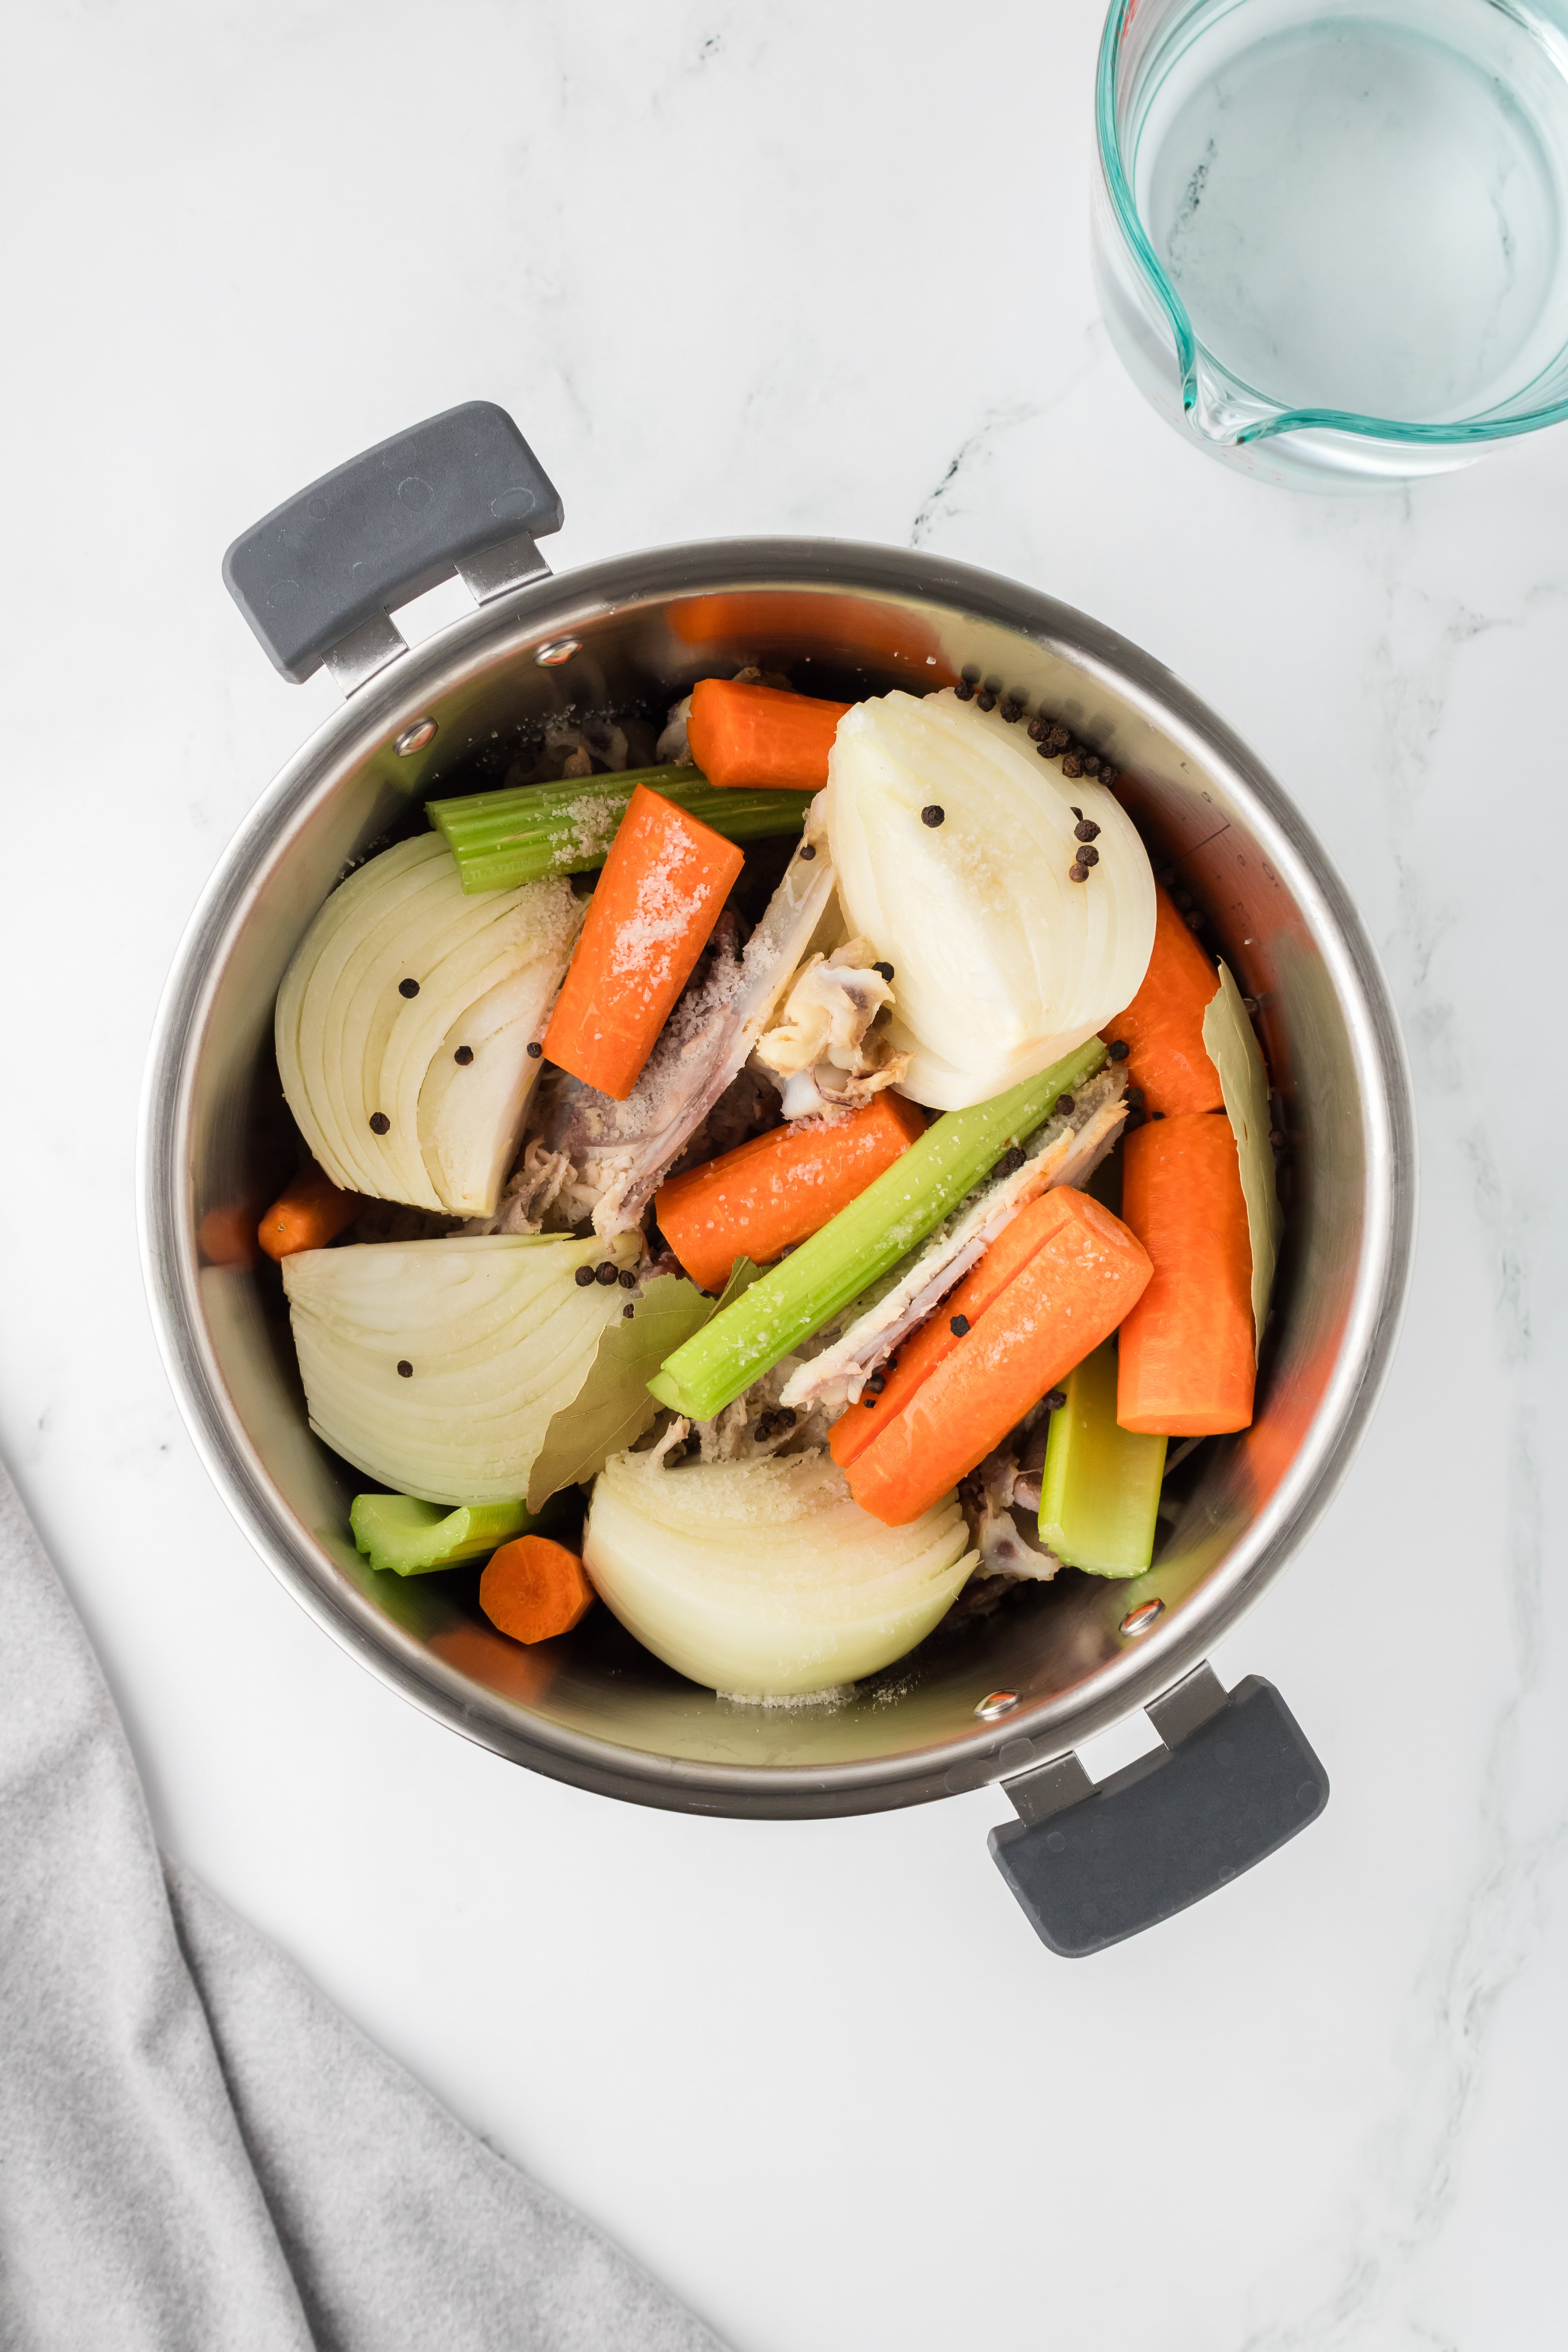 An Instant Pot filled with bones, onions, celery, and carrots.